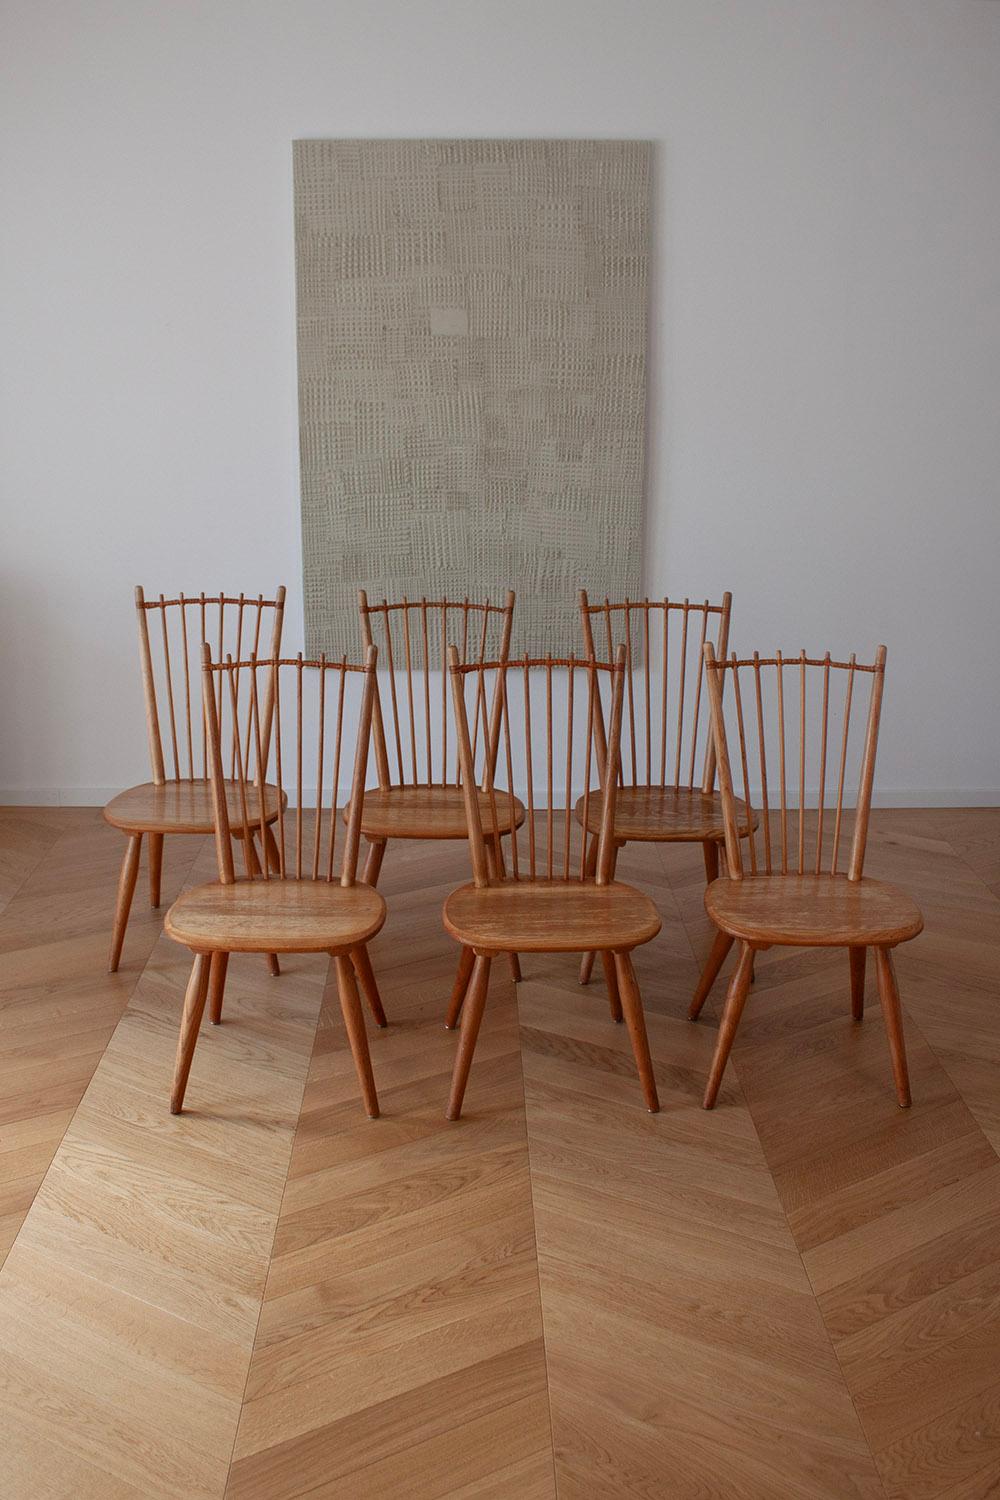 This rare set of 6 dining chairs are designed by Albert Haberer and manufactured by Hermann Fleiner, Germany in ca 1950. These chairs are beautifully crafted with attention to detail. The backrest spindles are skillfully connected with a leather